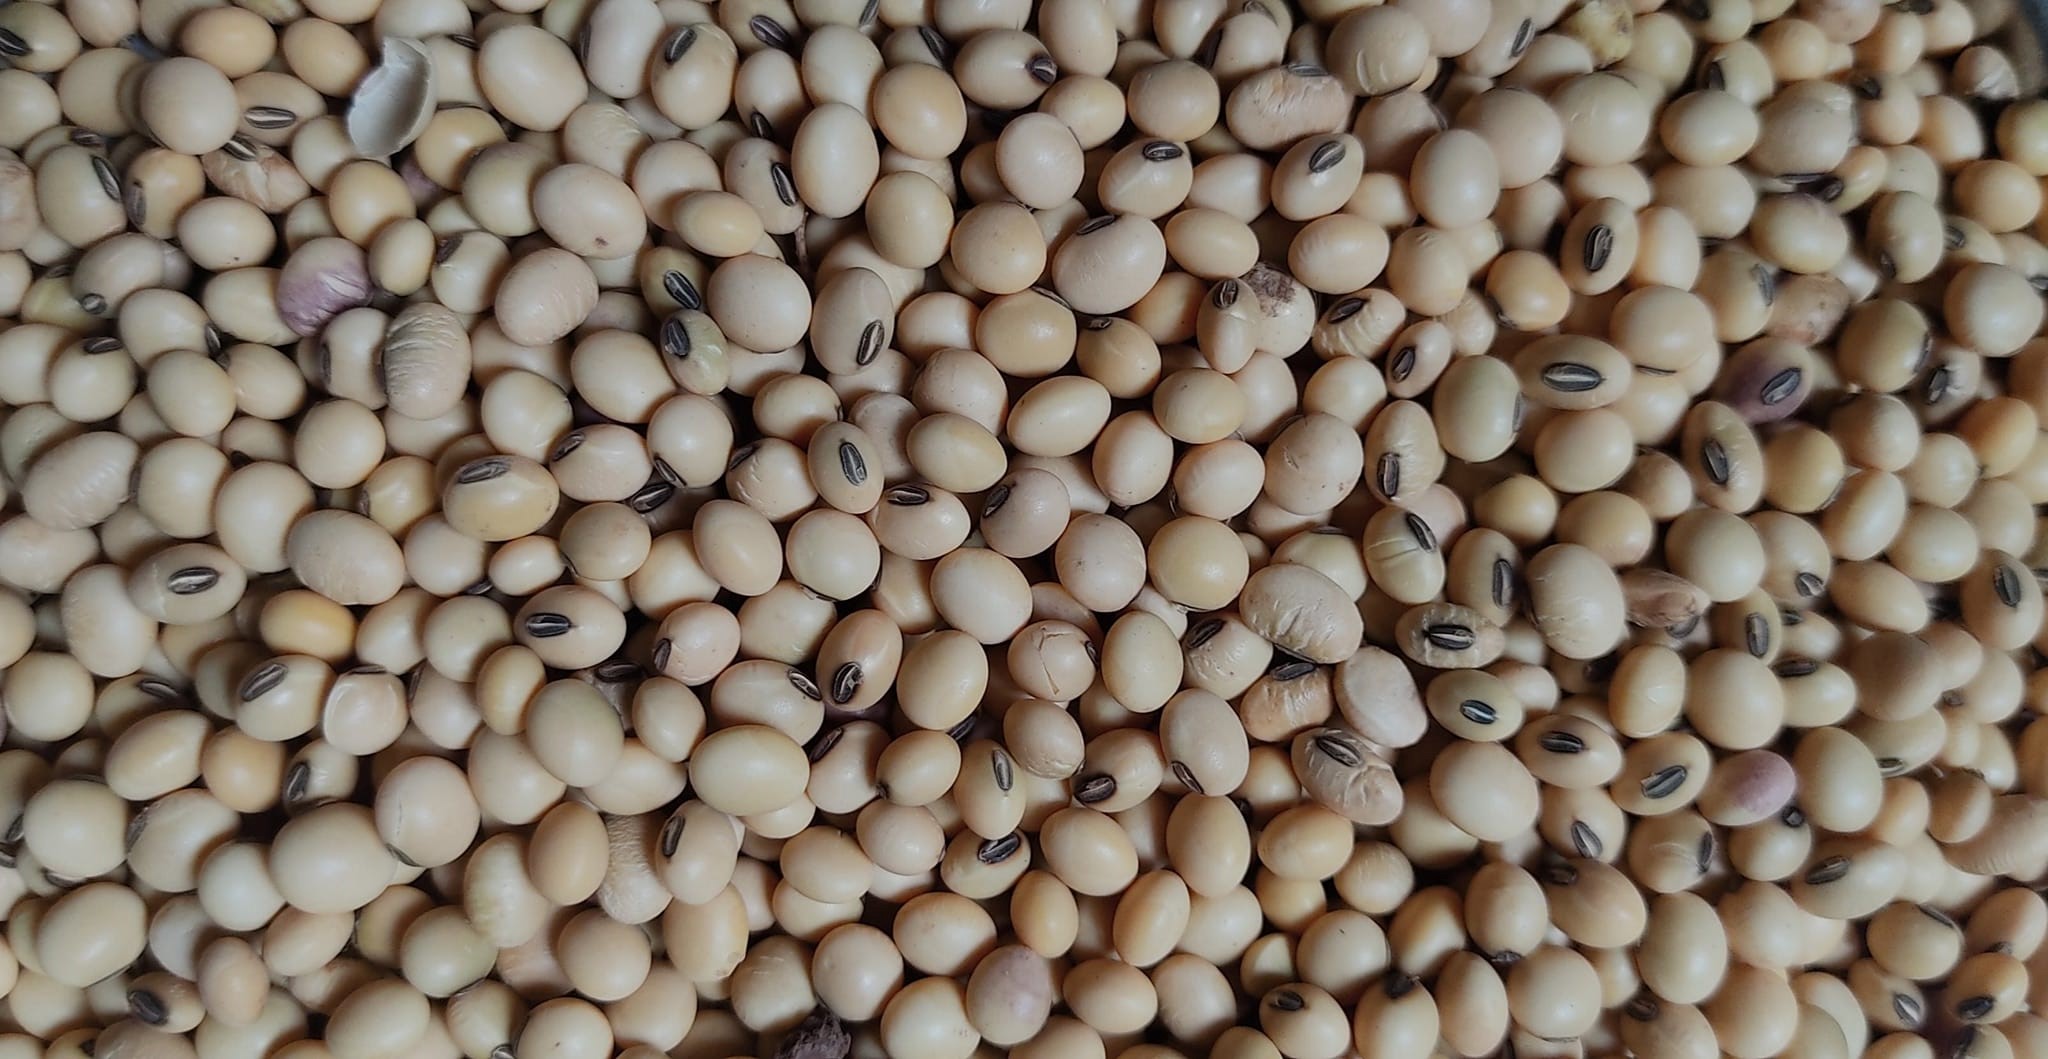 Agriculture products : Premium quality Soybean Seeds available for sale